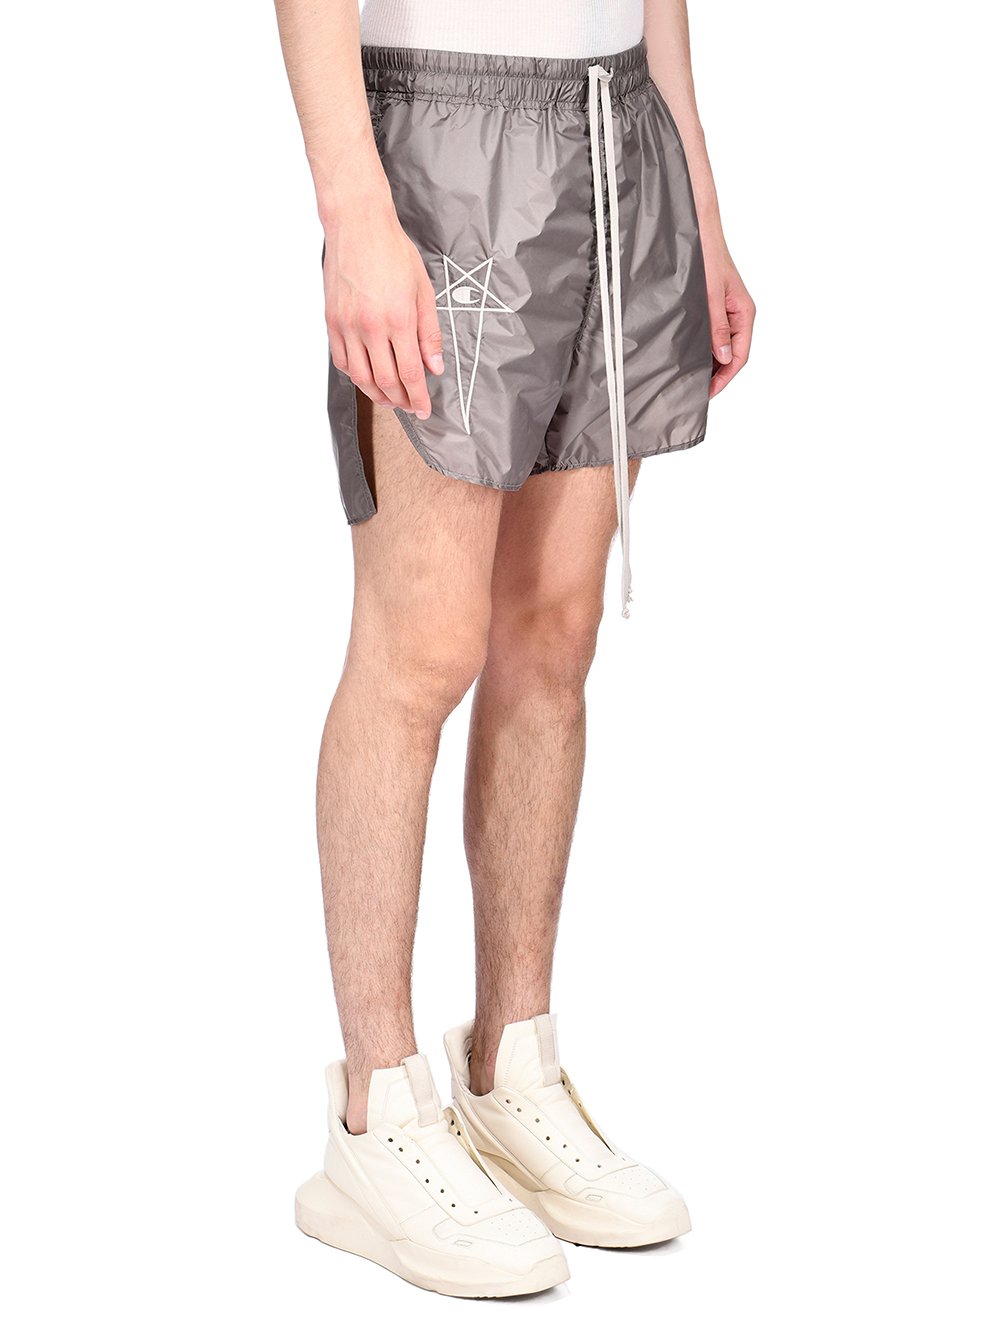 CHAMPION X RICK OWENS DOLPHIN BOXERS IN DUST GREY RECYCLED NYLON